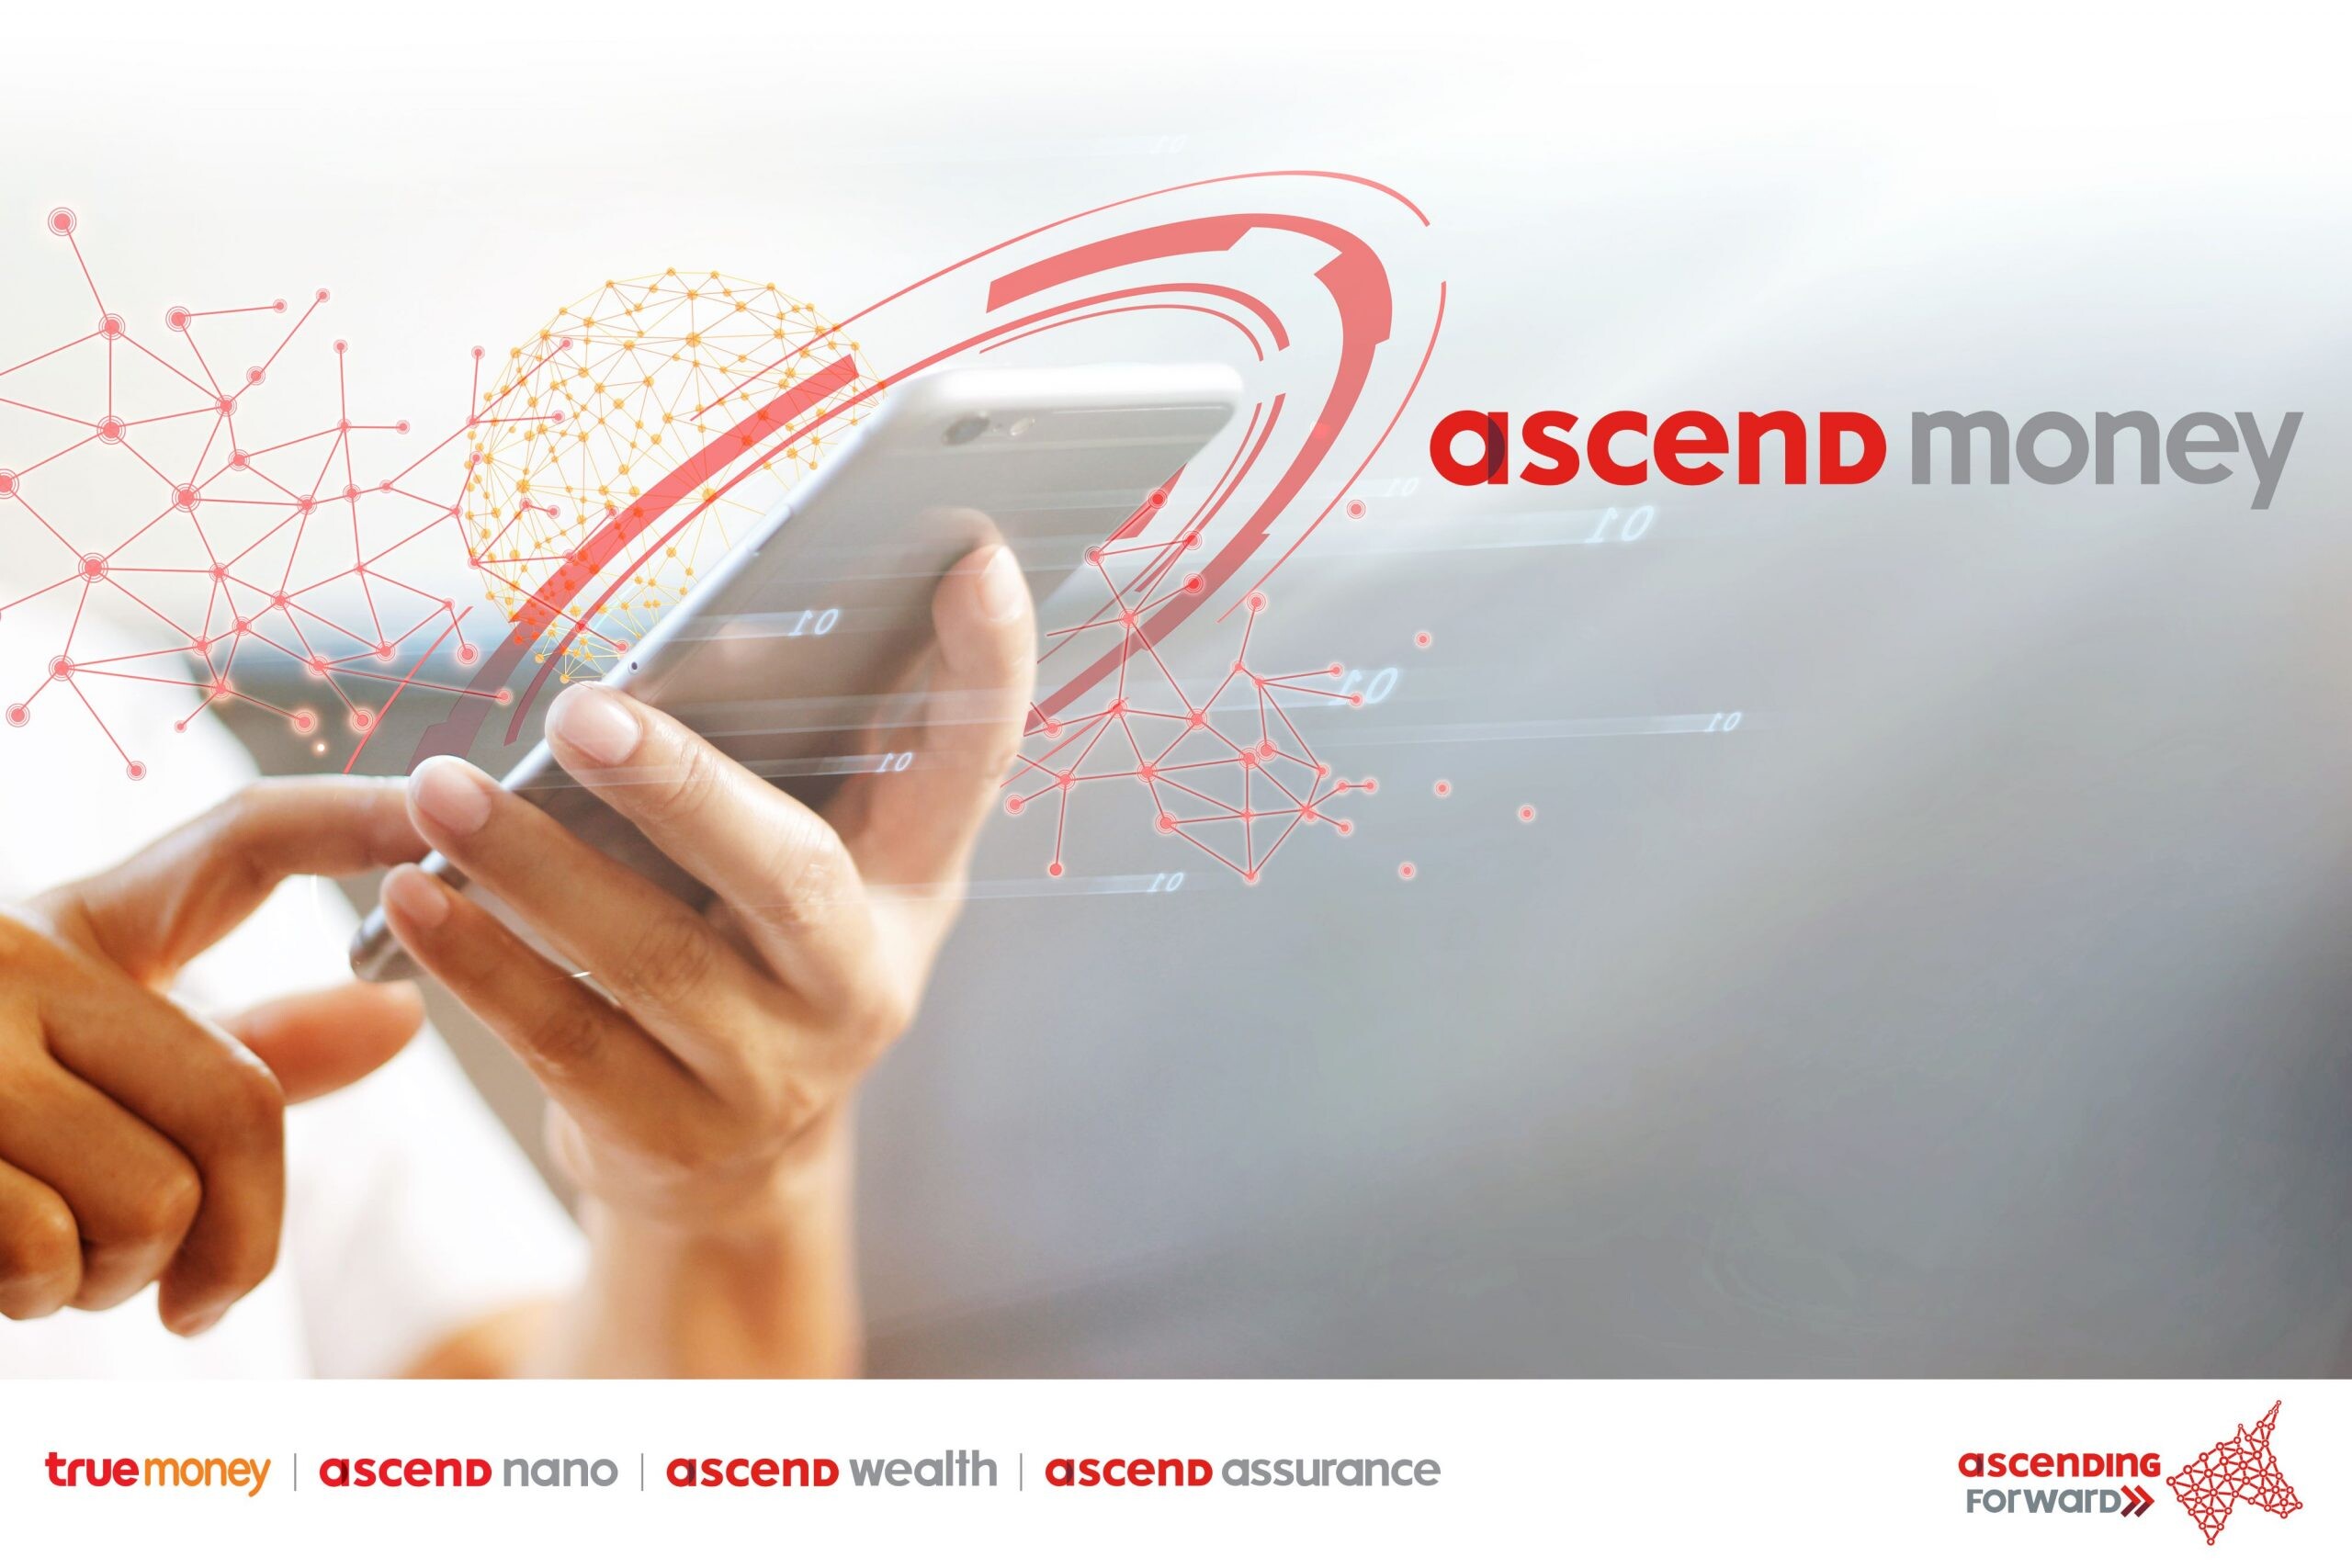 Ascend Money hits US$1.5 billion valuation with new funding, becomes Thailand's first fintech unicorn